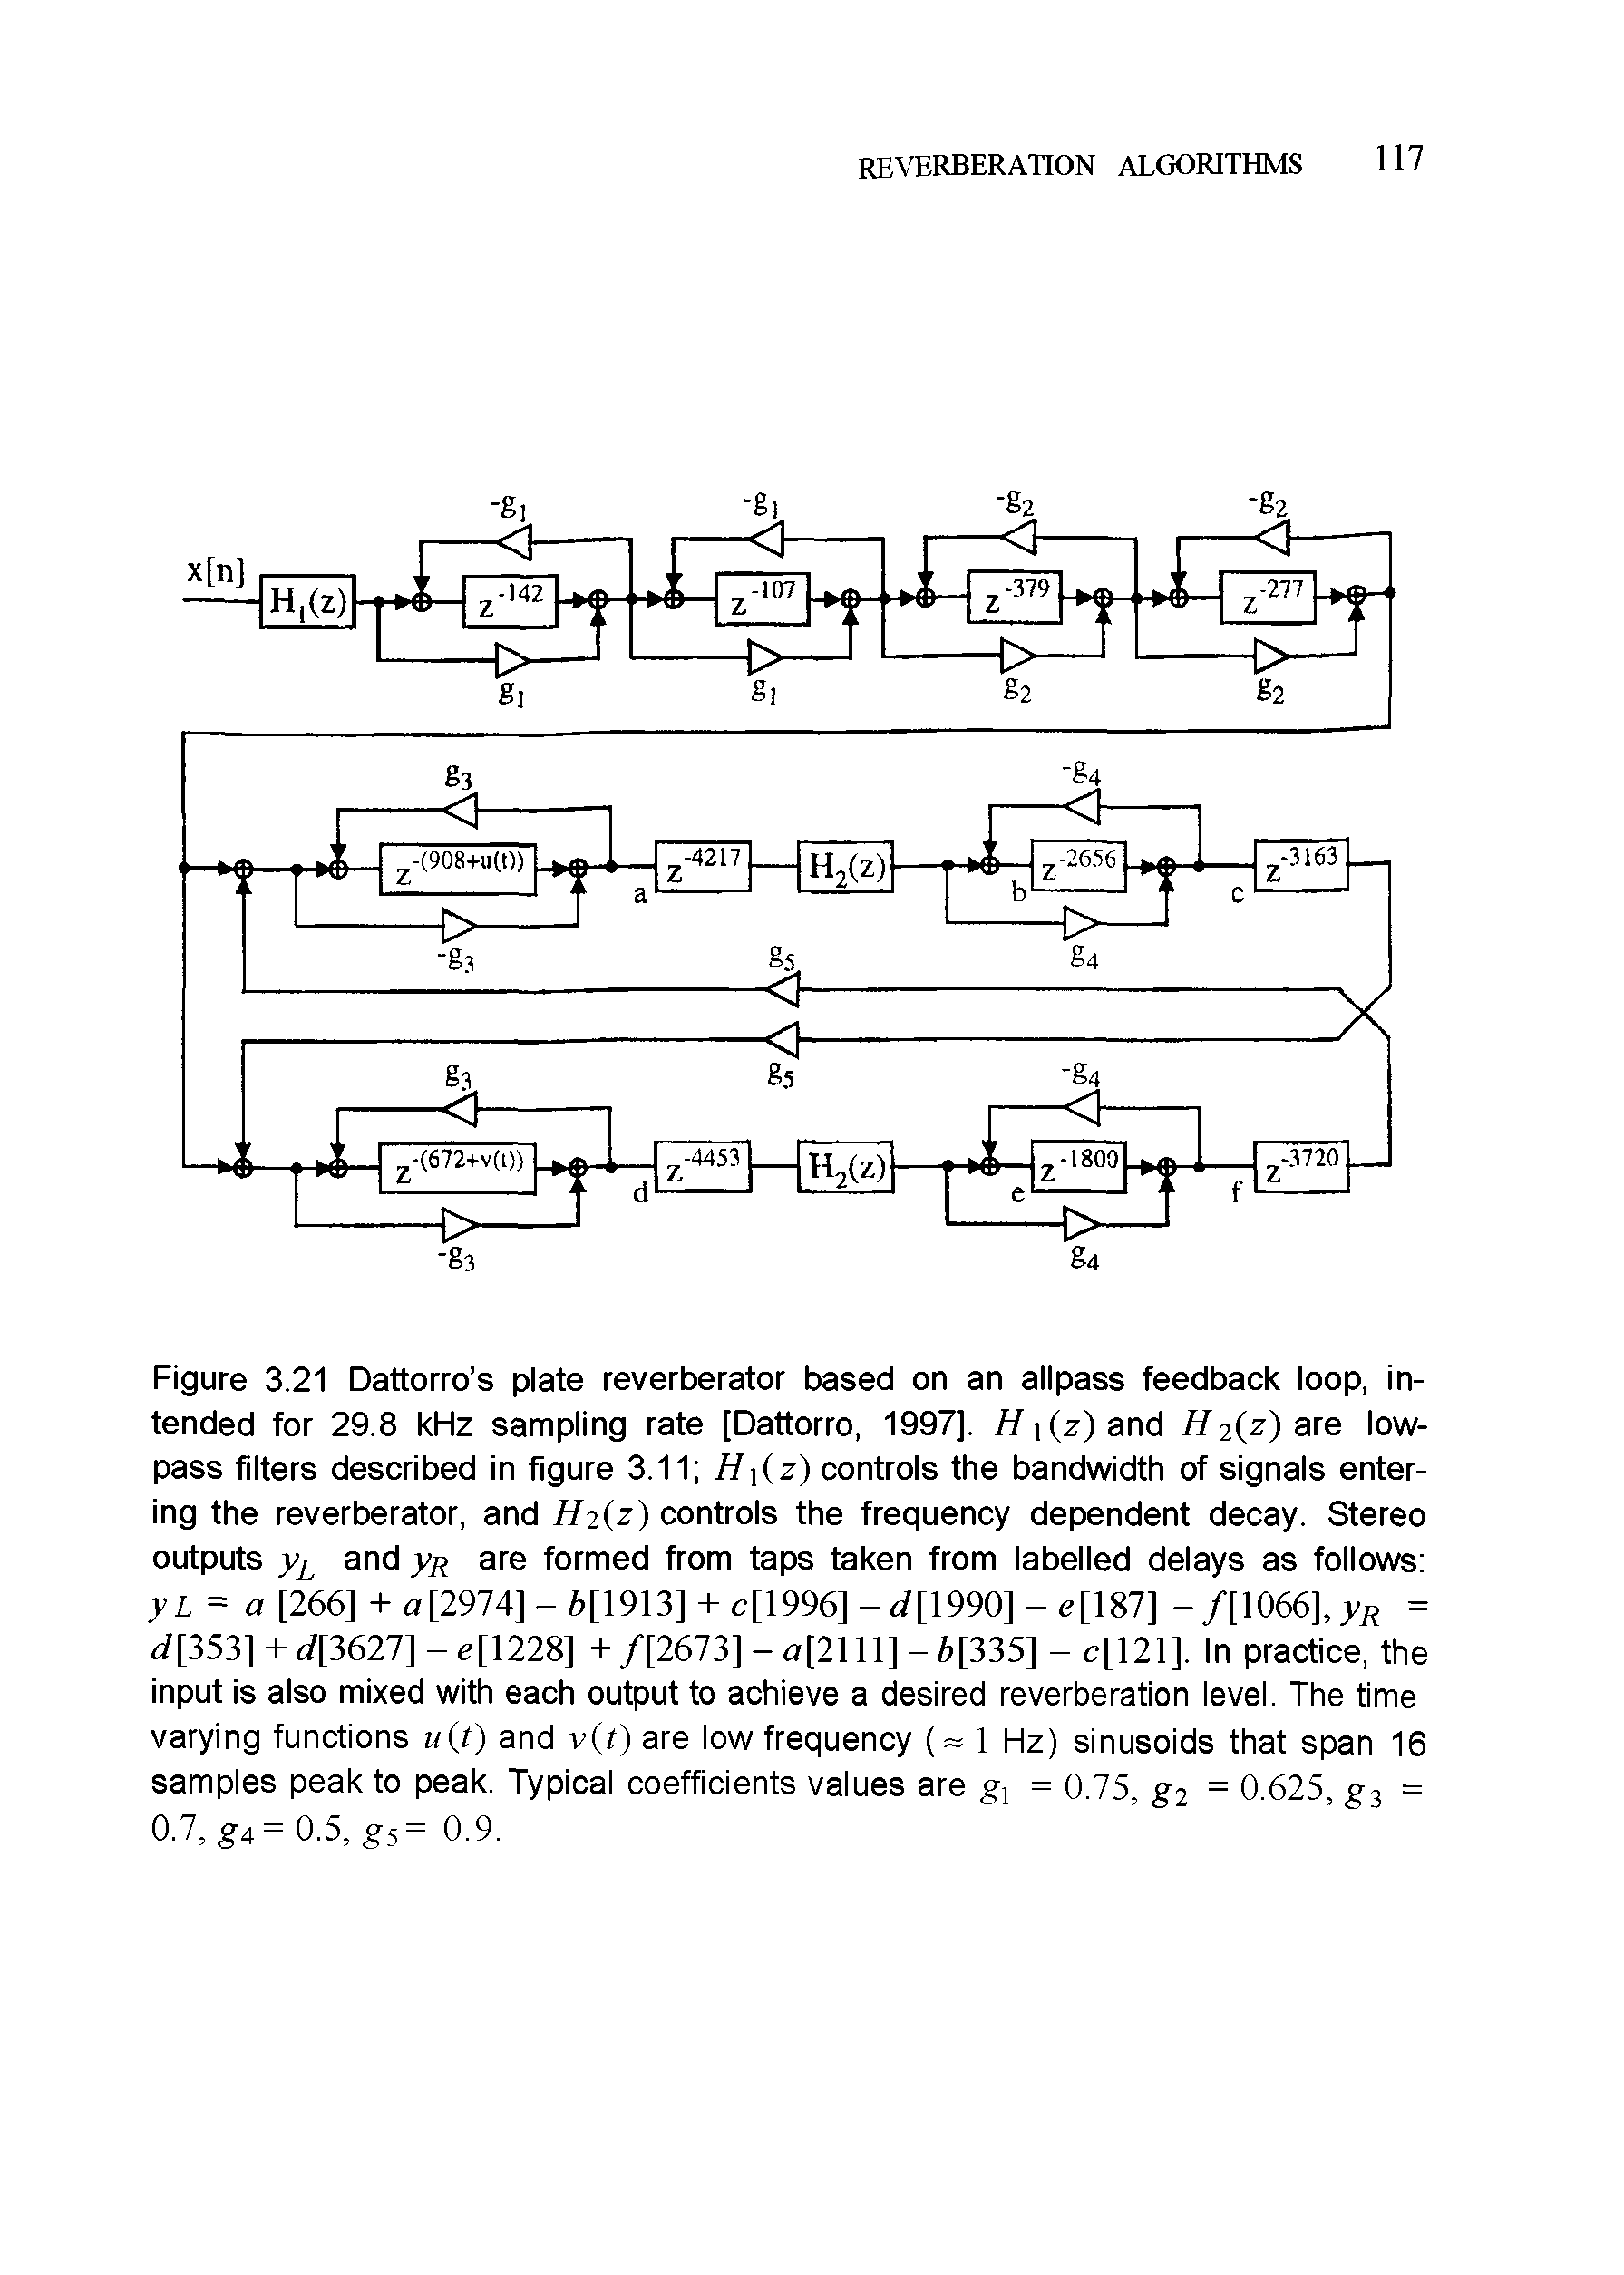 Figure 3.21 Dattorro s plate reverberator based on an allpass feedback loop, intended for 29.8 kHz sampling rate [Dattorro, 1997]. //i(z)and H2(z) are low-pass filters described in figure 3.11 H (z) controls the bandwidth of signals entering the reverberator, and H2(z) controls the frequency dependent decay. Stereo outputs yL and yR are formed from taps taken from labelled delays as follows yL = a [266] + a[2974] - [1913] + c[1996] - < [1990] - e[187] - f[ 066], yR = < [353] + < [3627] - e[1228] + /[2673] - a[2111] - >[335] - c[121]. In practice, the input is also mixed with each output to achieve a desired reverberation level. The time varying functions u(t) and v(t) are low frequency (= 1 Hz) sinusoids that span 16 samples peak to peak. Typical coefficients values are gj = 0.75, g2 = 0.625, g3 = 0.7, g4= 0.5, g5= 0.9.